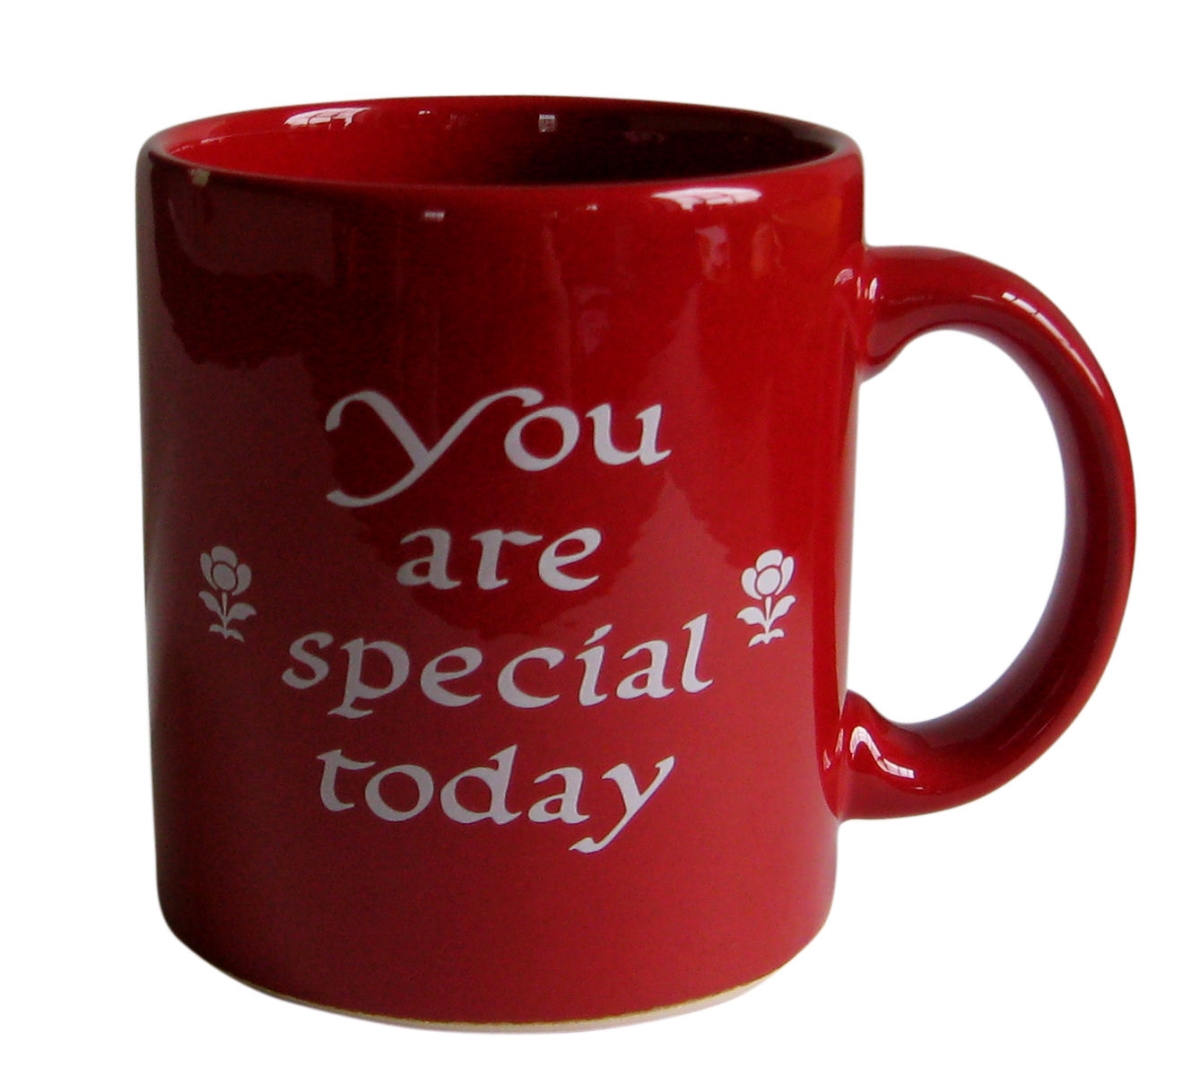 01 S 4mg 1903 You Are Special Today Mugs - Set Of 4